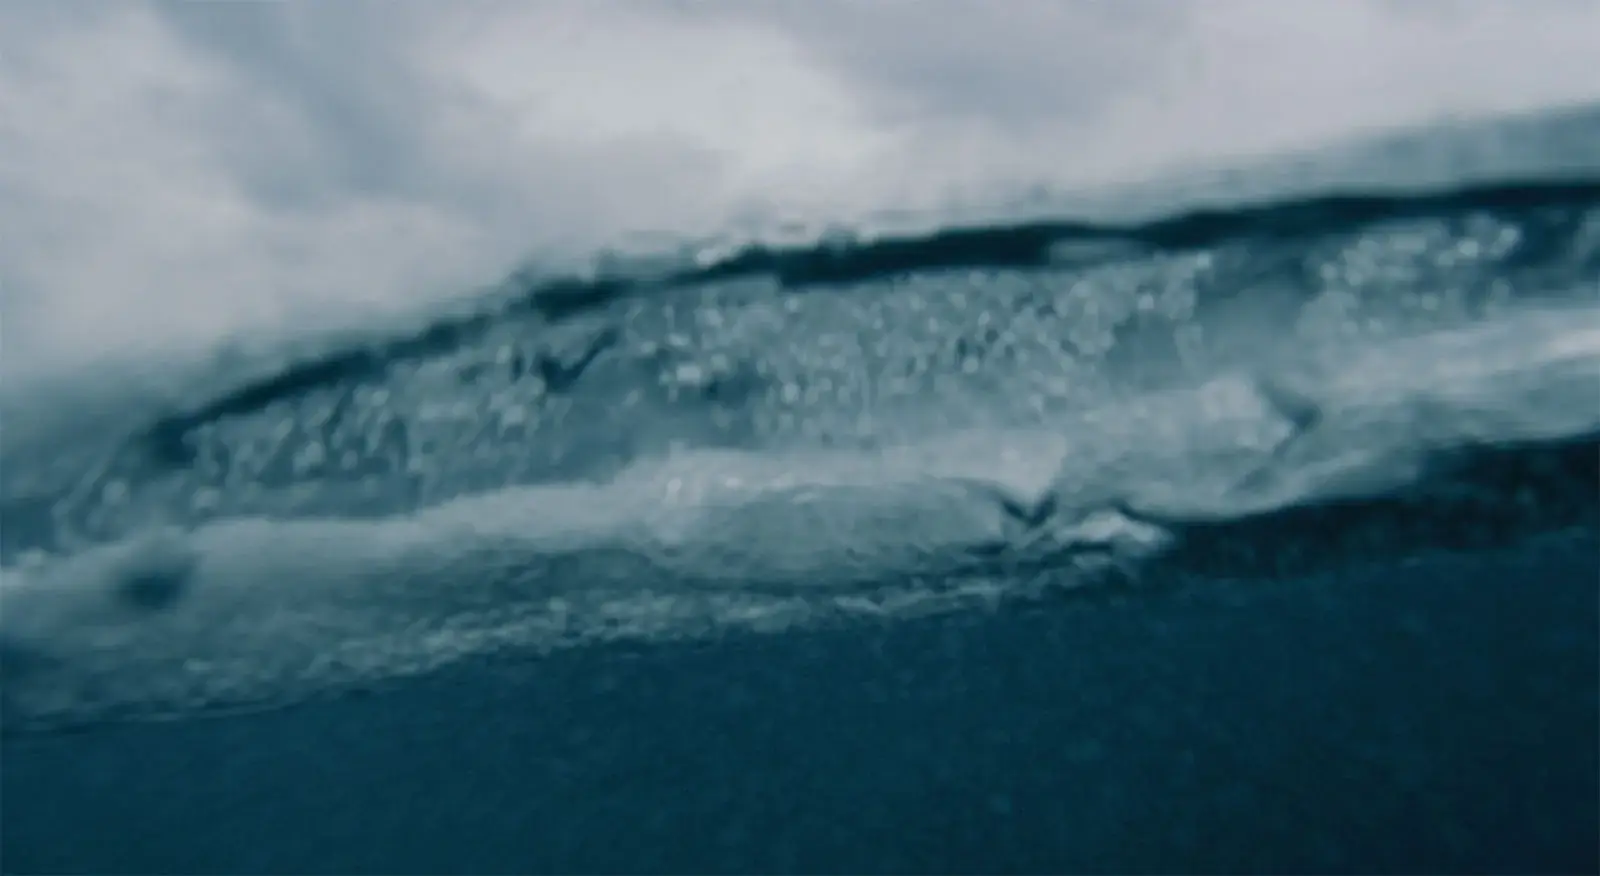 Blurry underwater view with light refracting through turbulent waters.